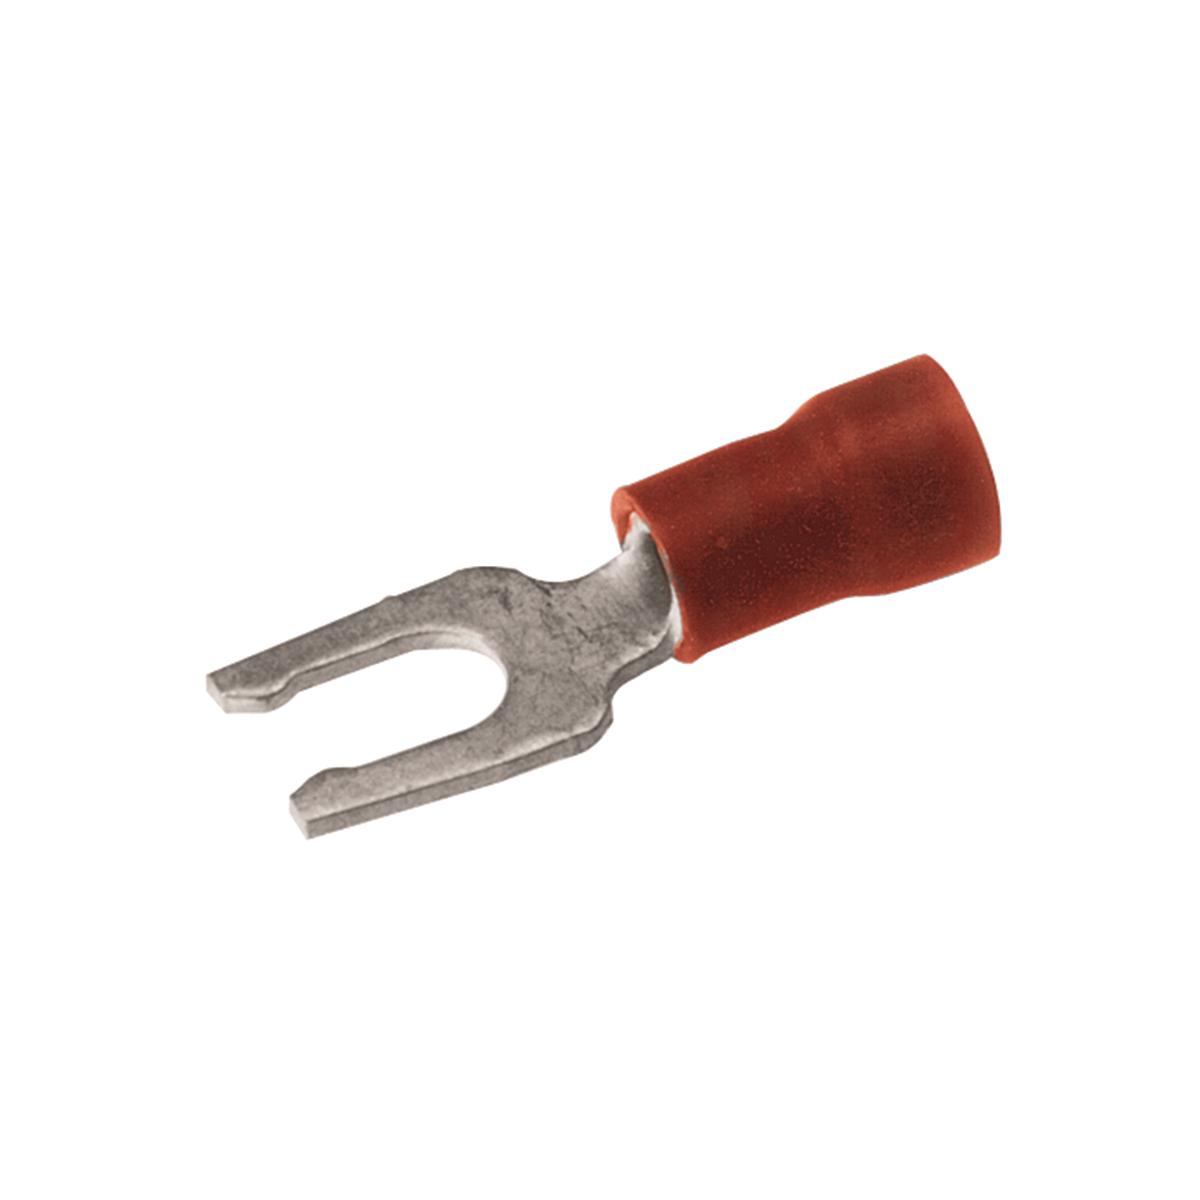 Hubbell BA16EL10 Vinyl Locking Fork Terminal For 22 - 16 AWG.  ; Features: Locking Fork Tongue Design: Allows Fast Installation-Screw Only Has To Be Loosened For Termination, Internal Configuration Of The Fork: Prevents The Terminal From Coming Off The Screw Without Apply